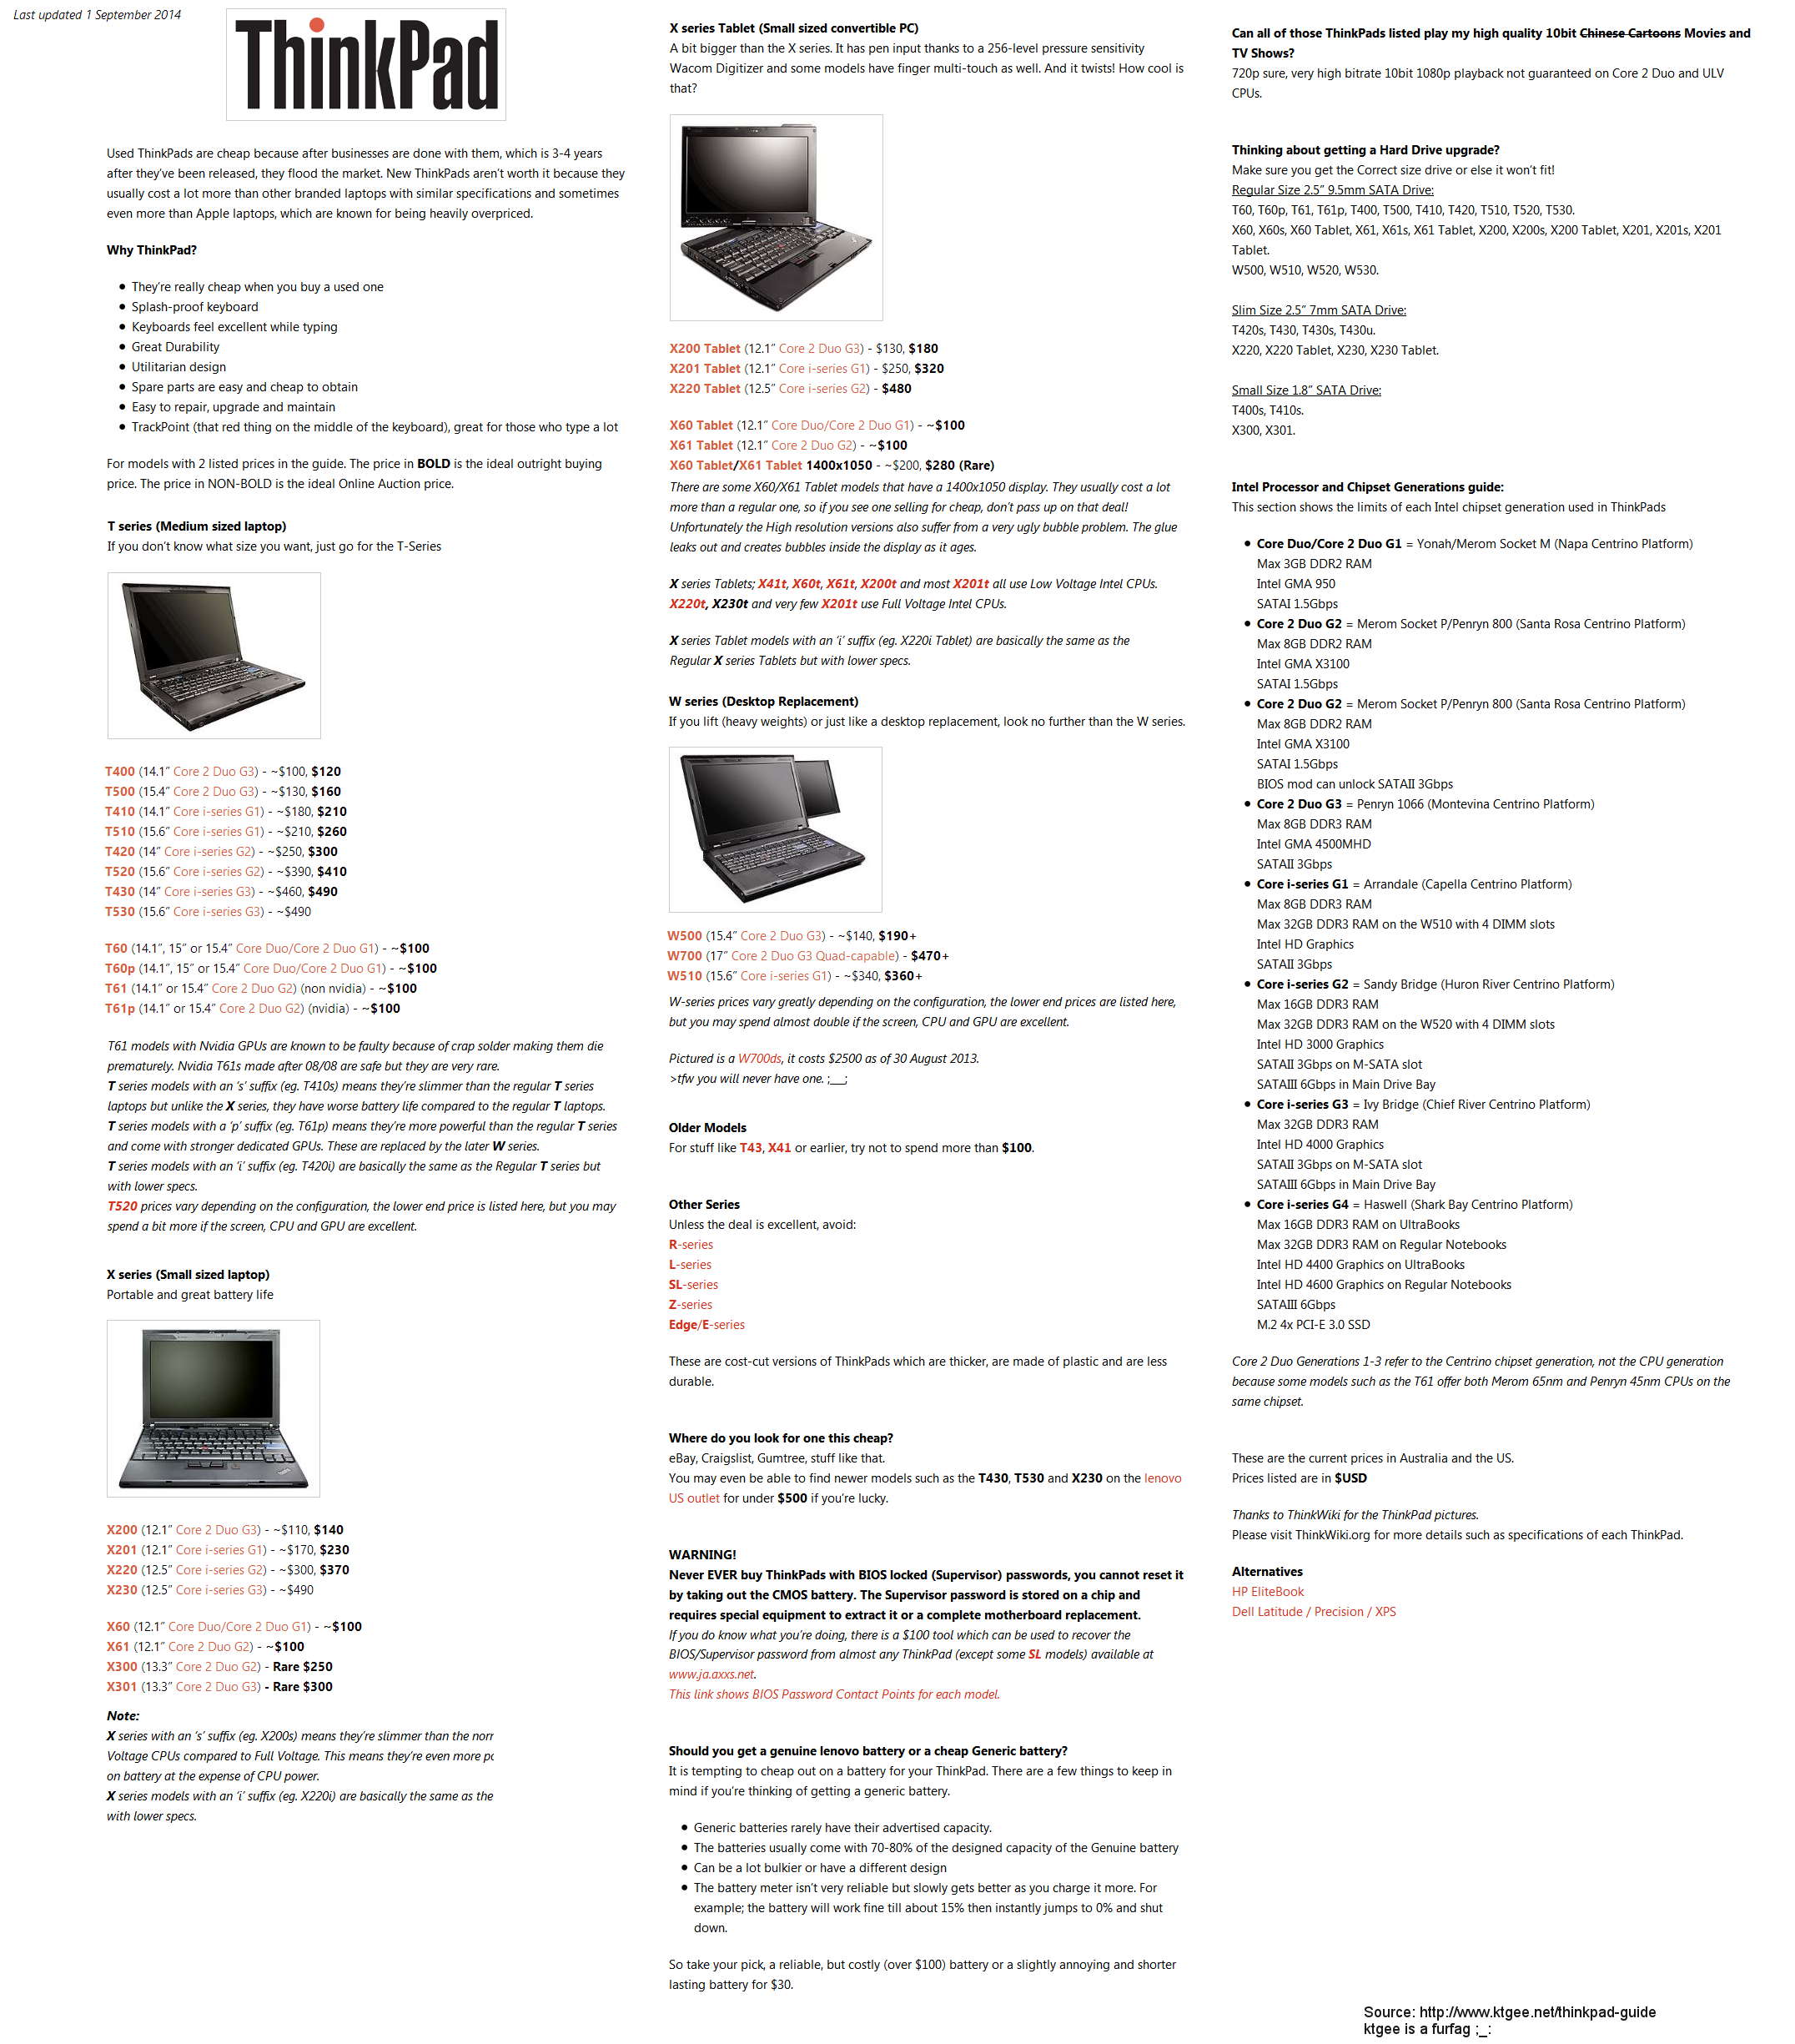 thinkpad-guide-ktgee.png